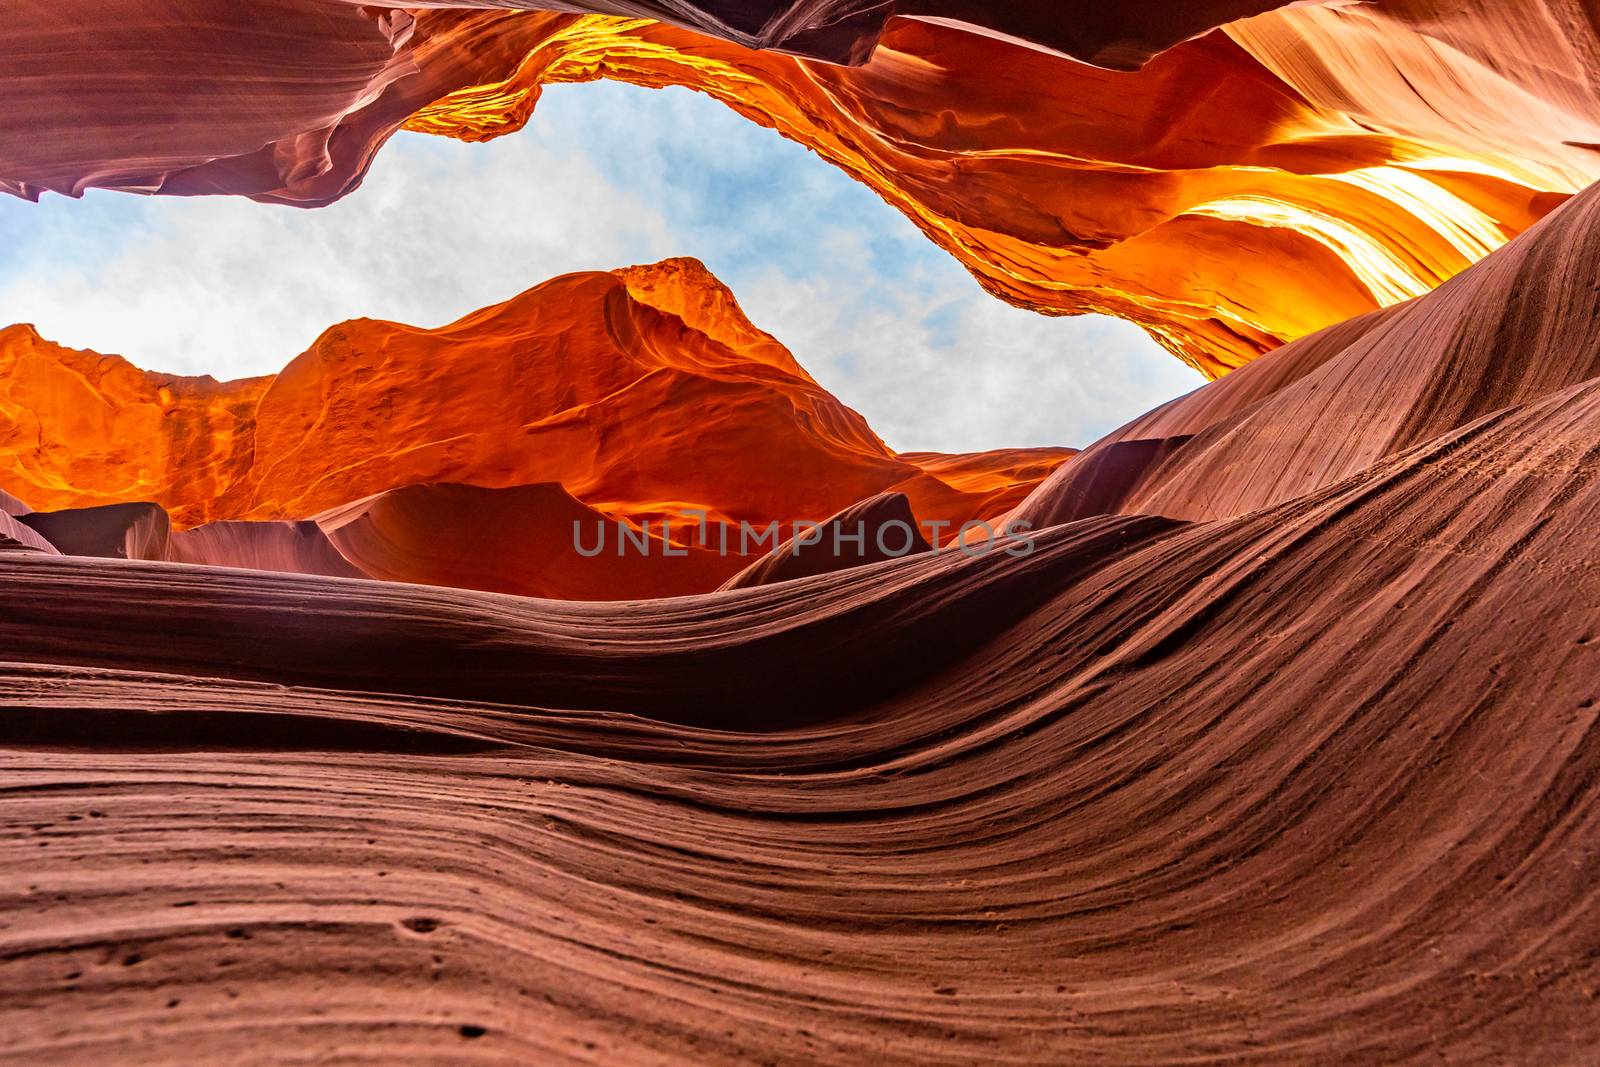 Lower Antelope Canyon in the Navajo Reservation near Page, Arizona USA